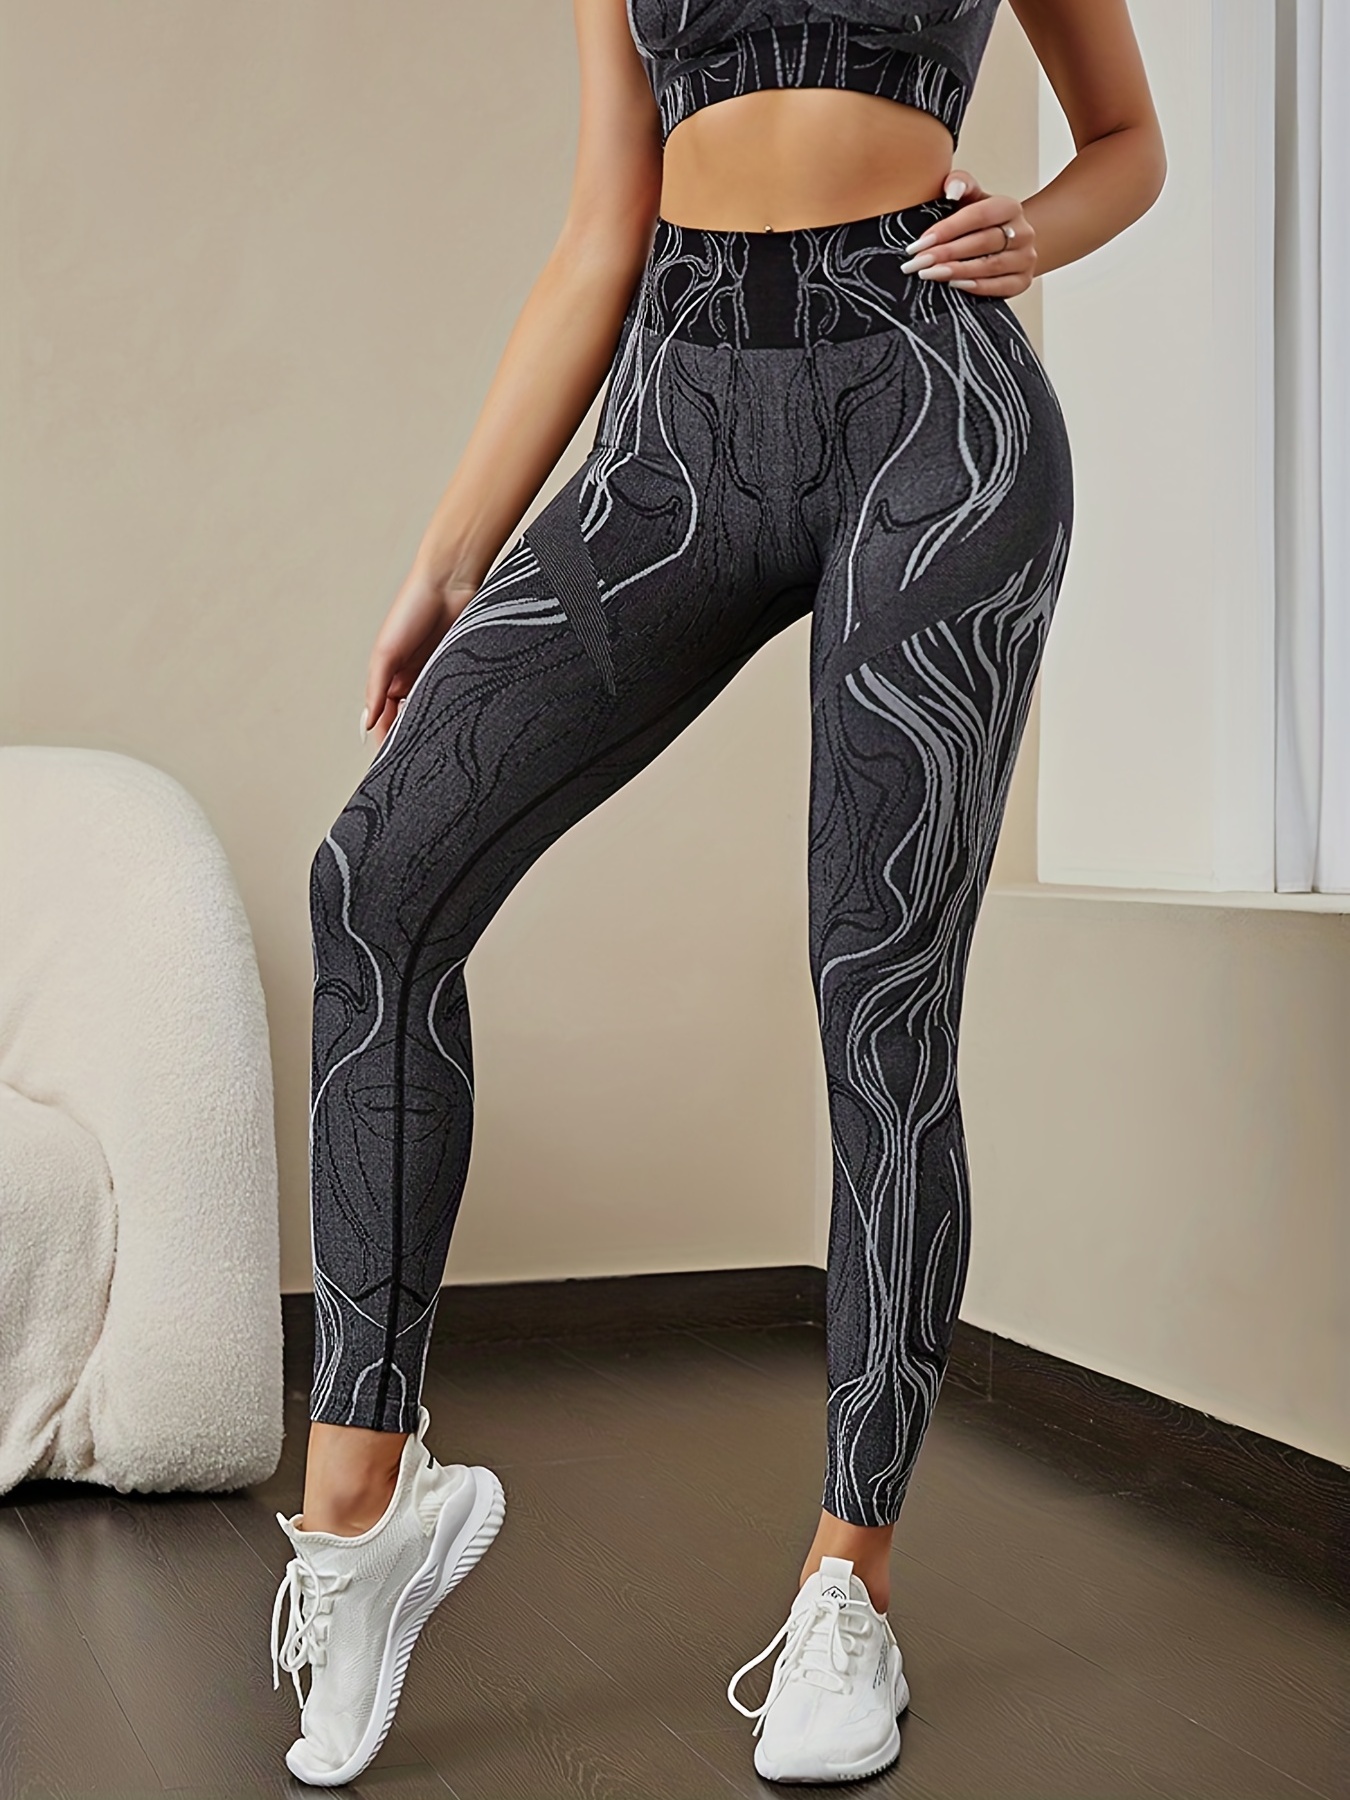 Seamless Print High Waist Funky Gym Leggings For Women Sexy, Stretchy, And  Hip Enhancing Sport Fitness Pants From Blossommg, $14.05